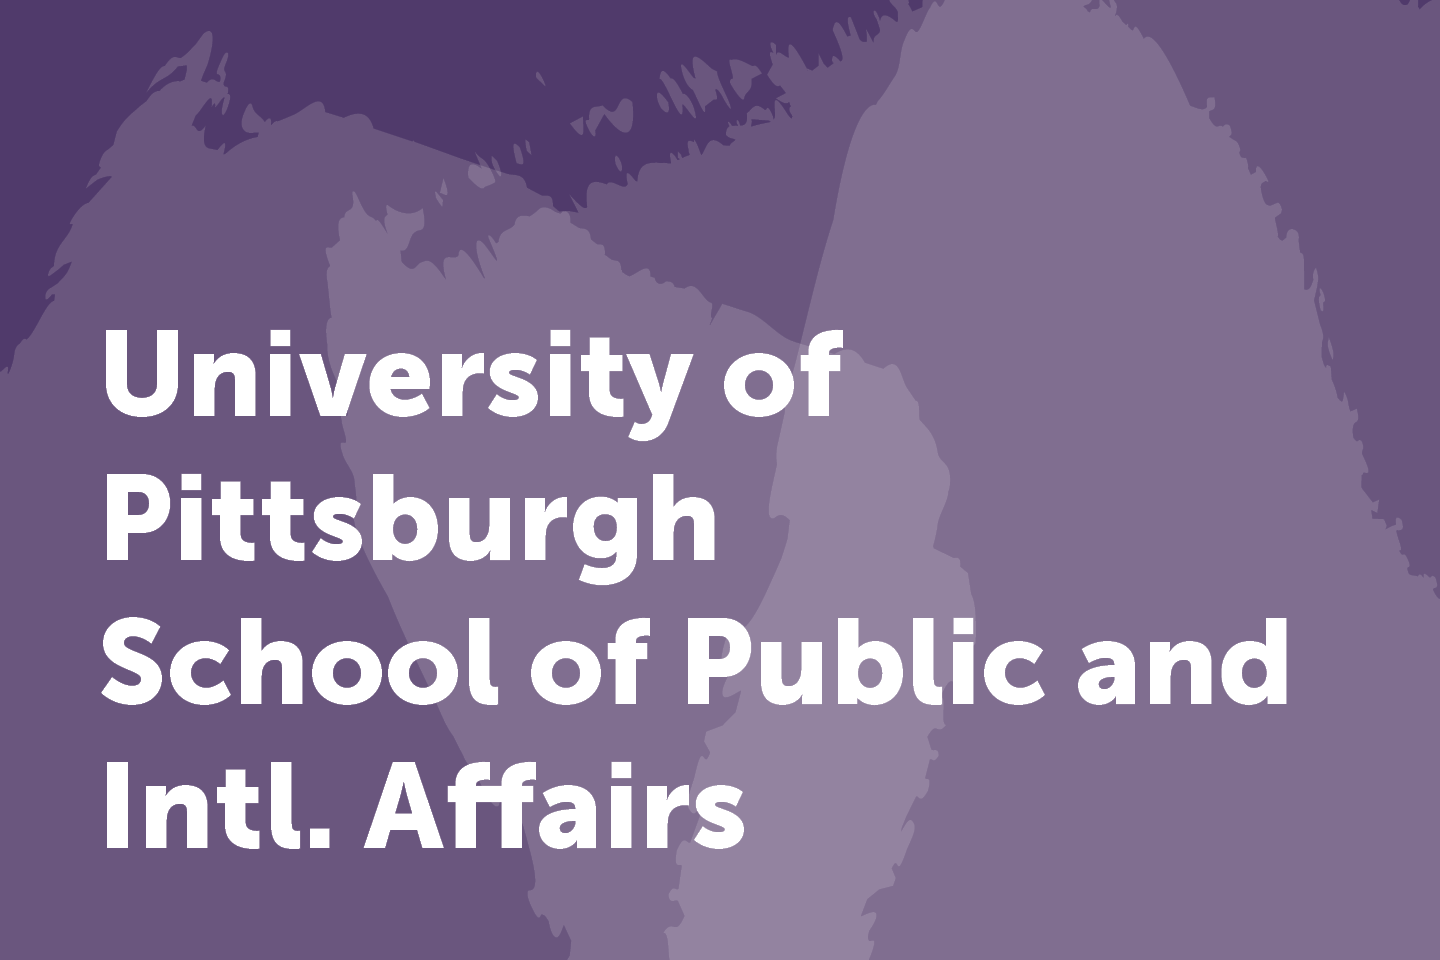 University of Pittsburgh School of Public and International Affairs